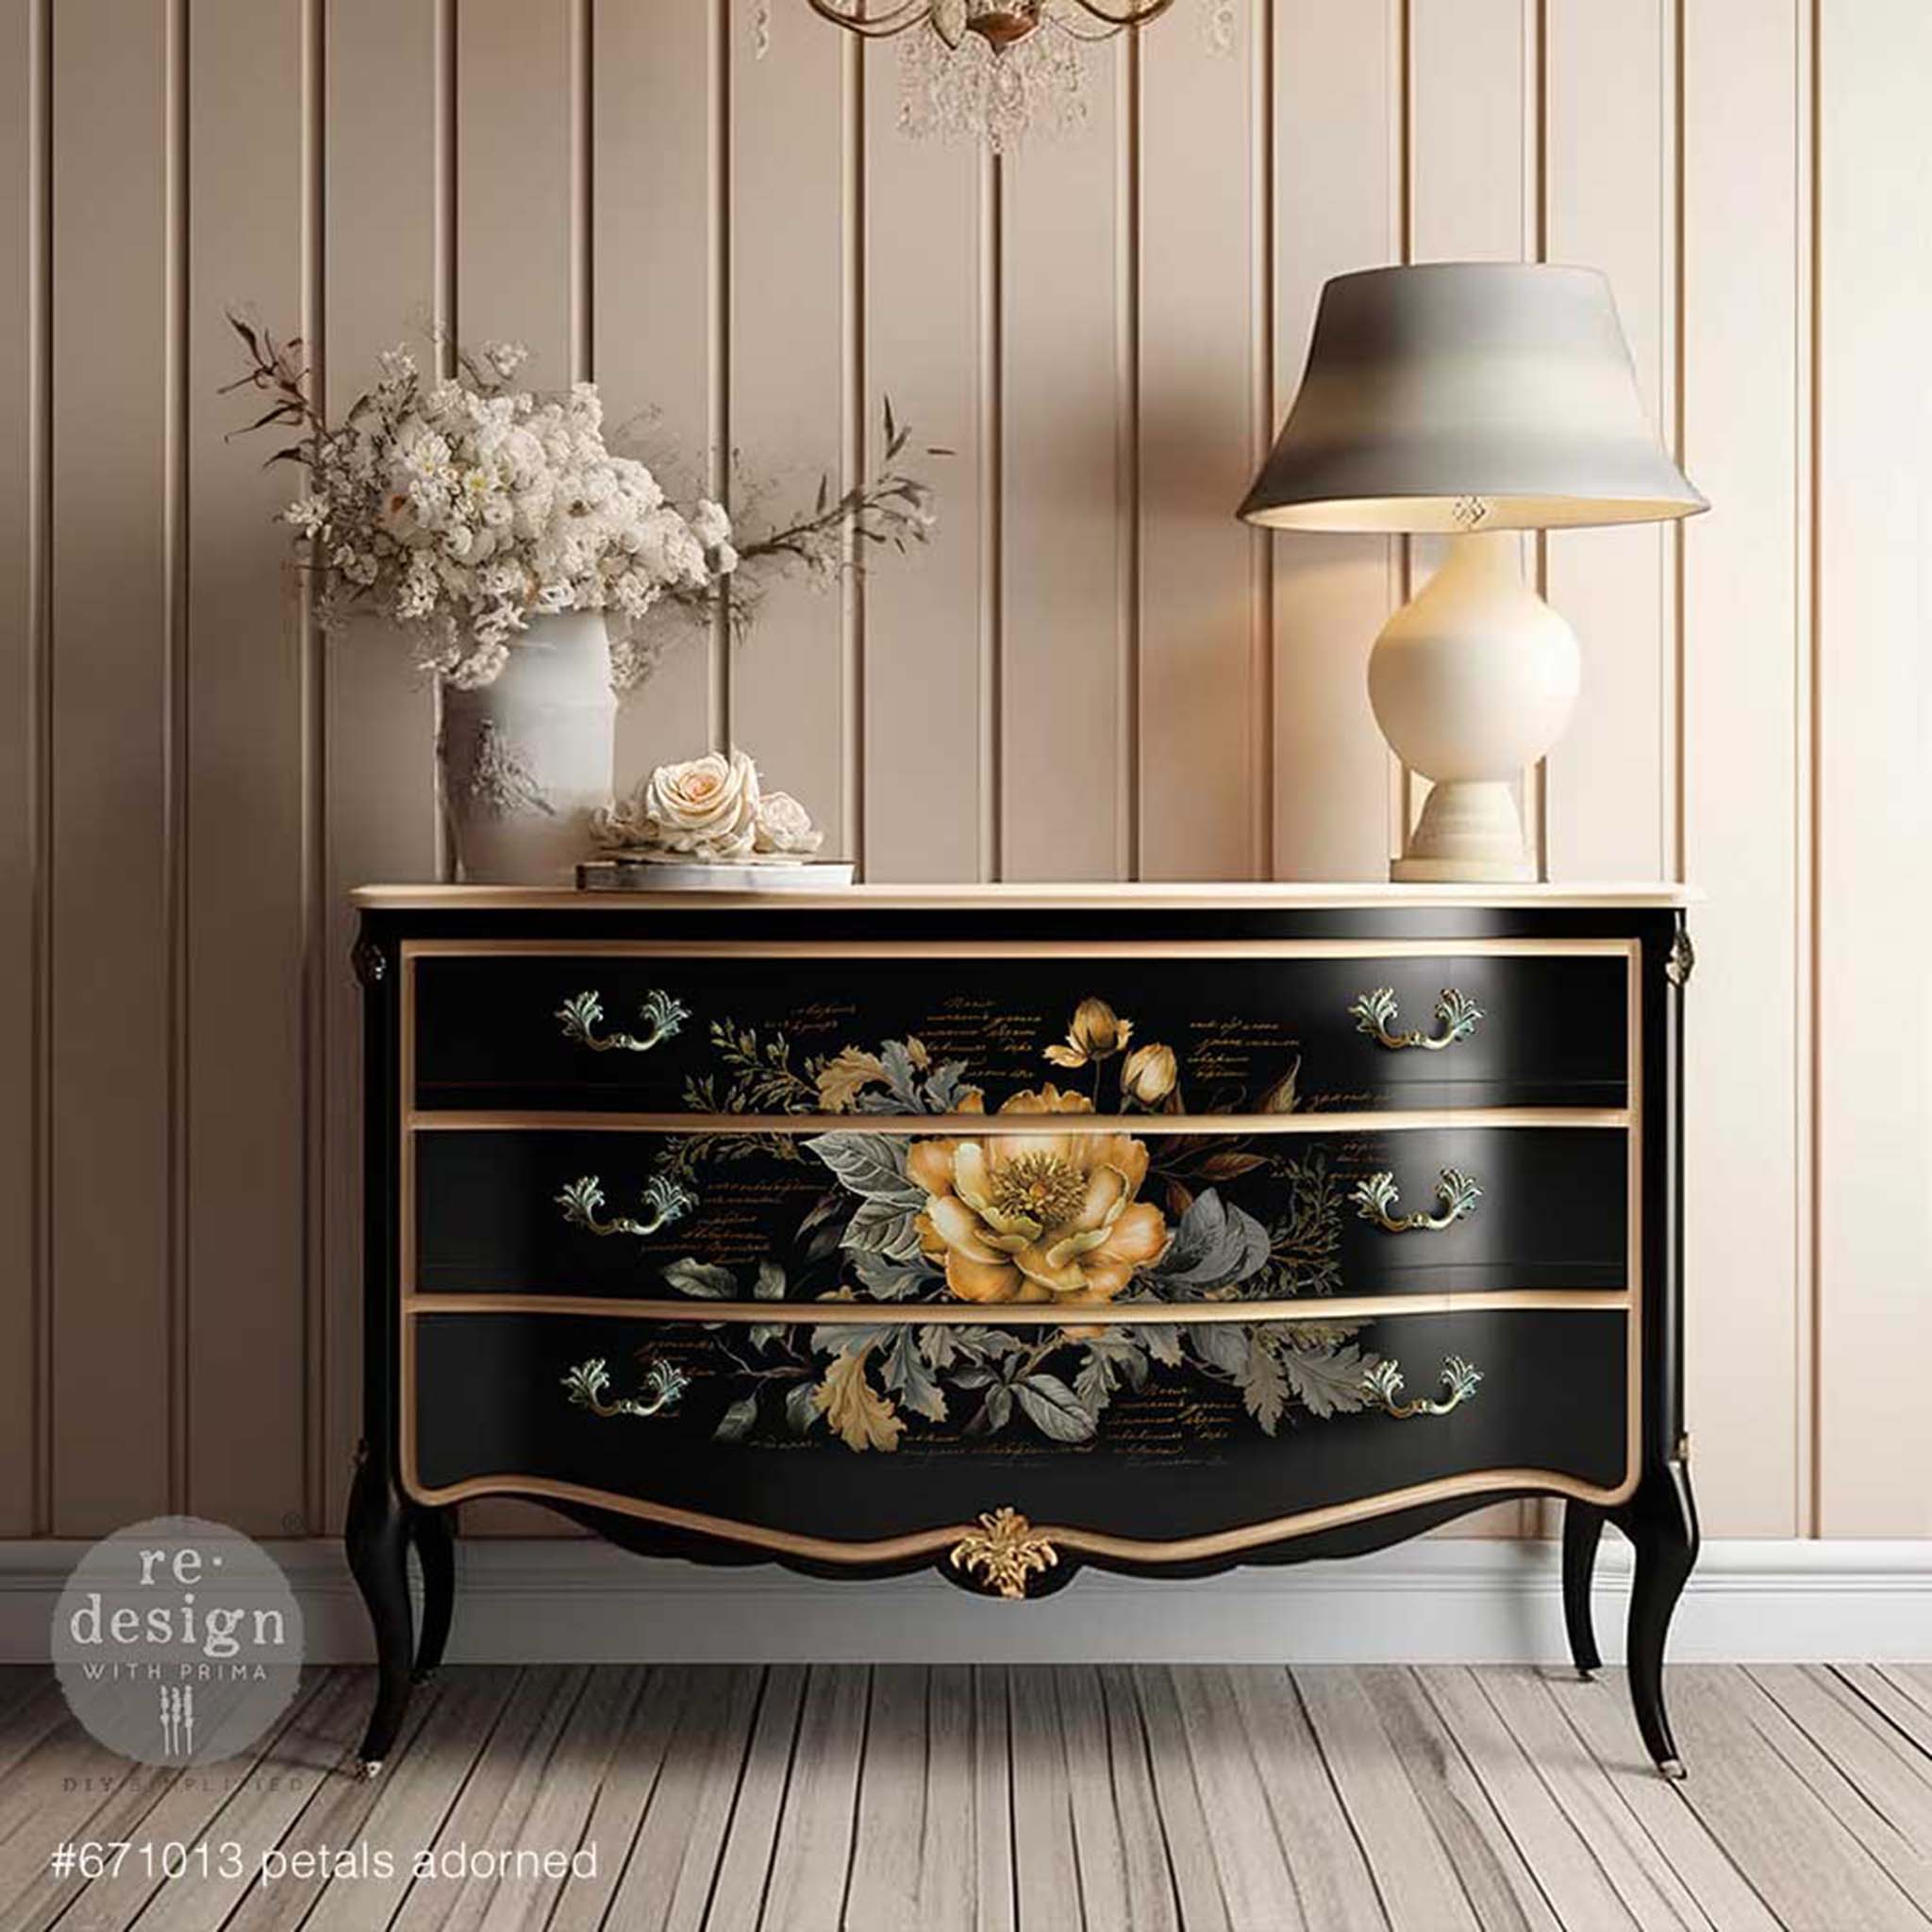 A vintage 3-drawer dresser is painted black with gold trim and features one sheet of ReDesign with Prima's Petals Adorned tissue paper in the center of all 3 drawers.